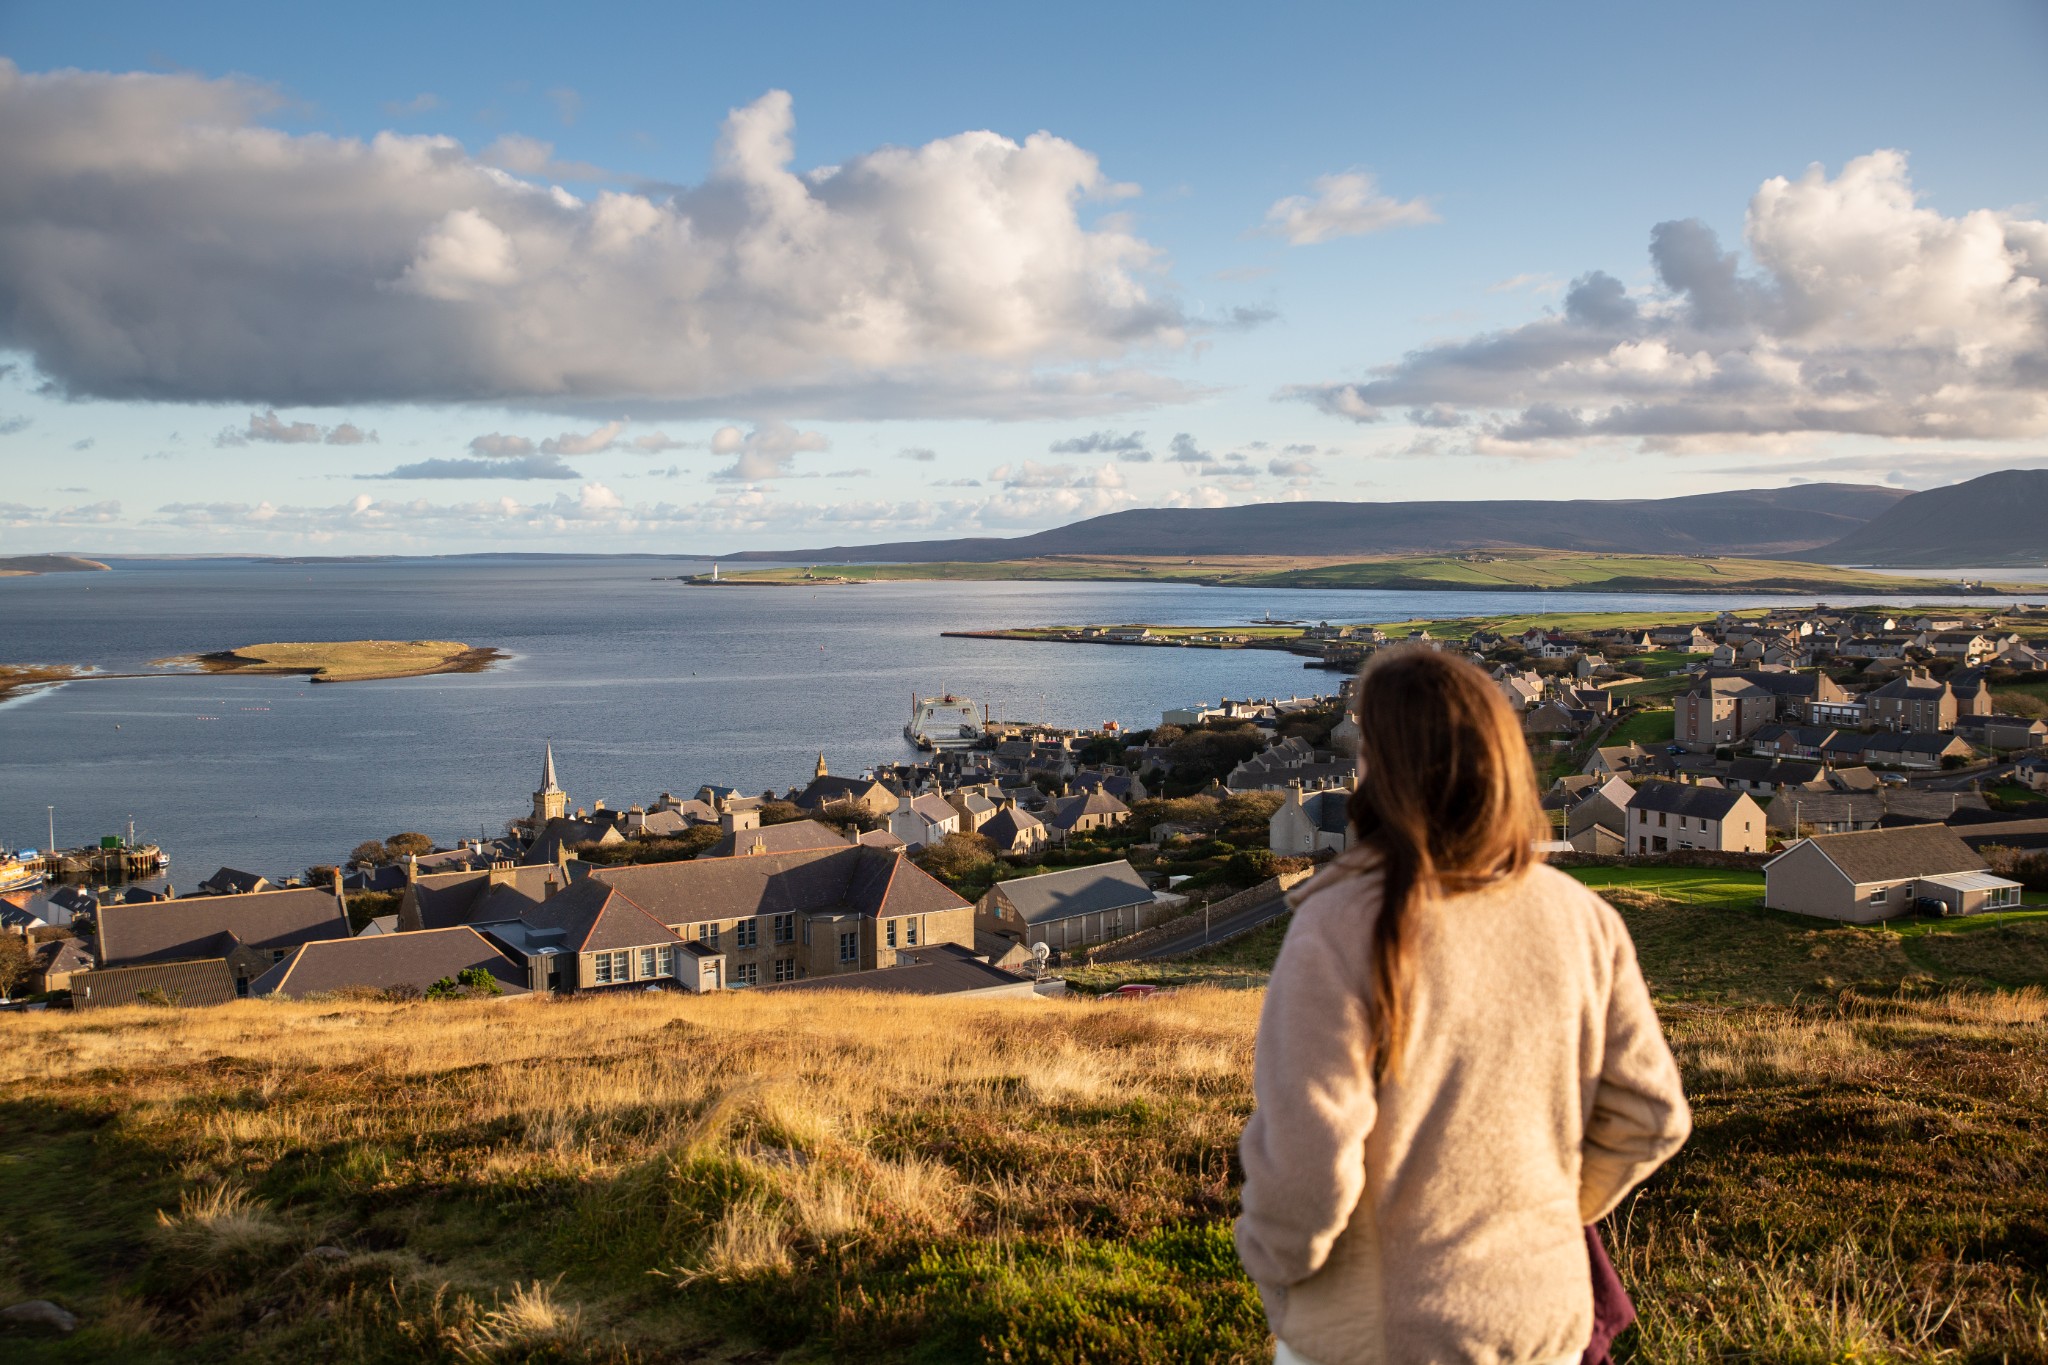 Looking out over Stromness from Brinkie's Brae